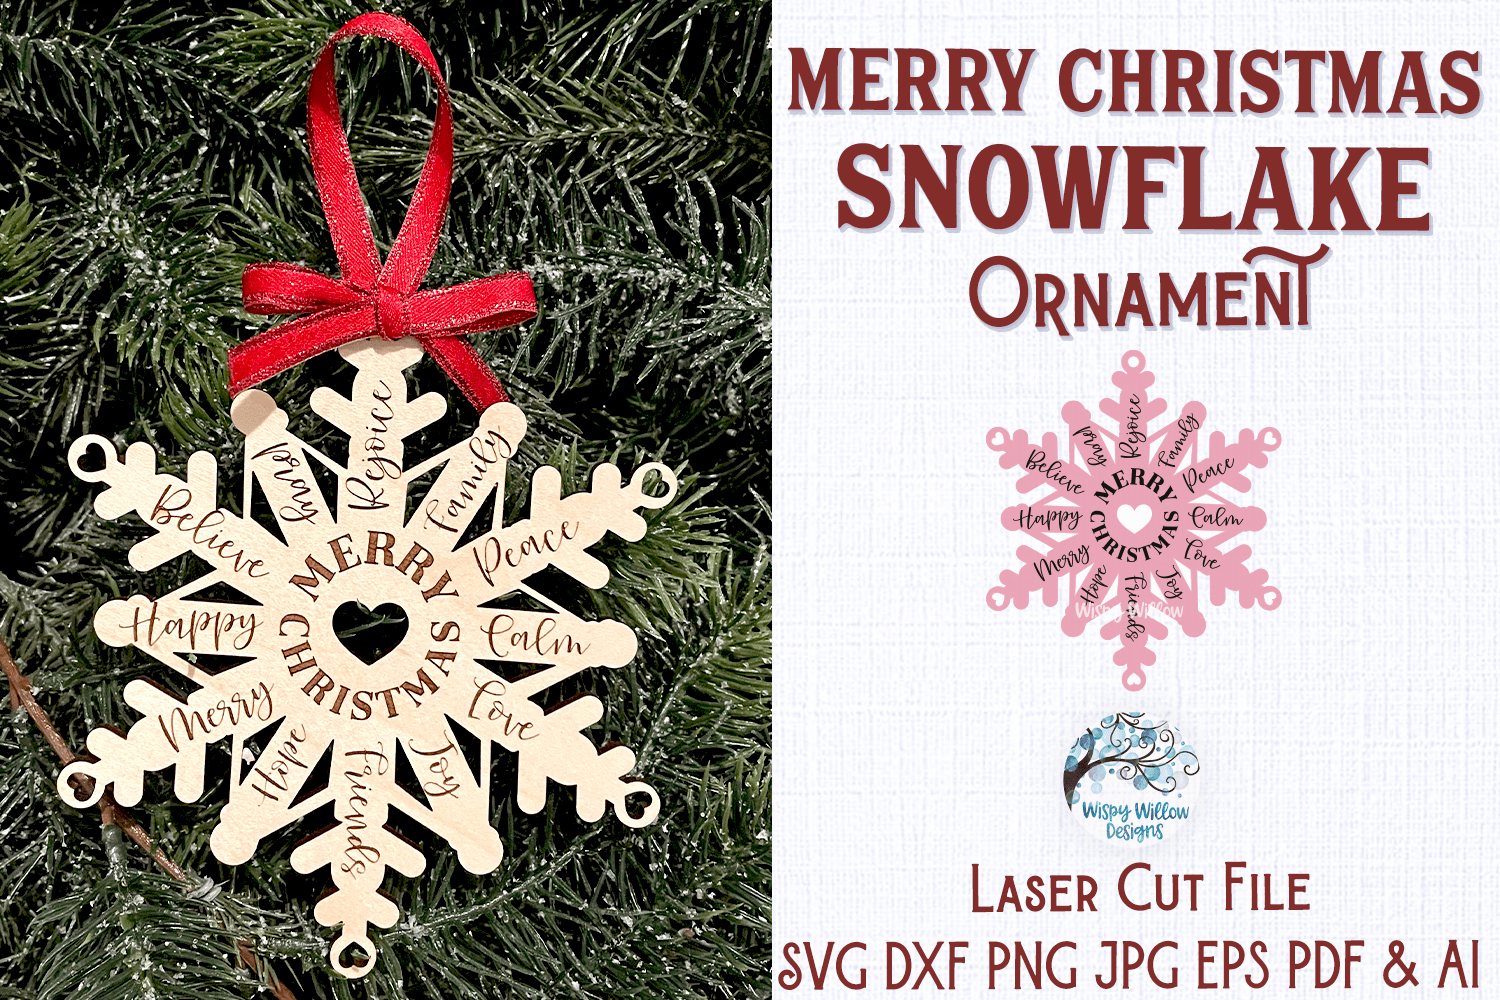 Merry Christmas Snowflake Ornament for Glowforge or Laser Cutter Wispy Willow Designs Company